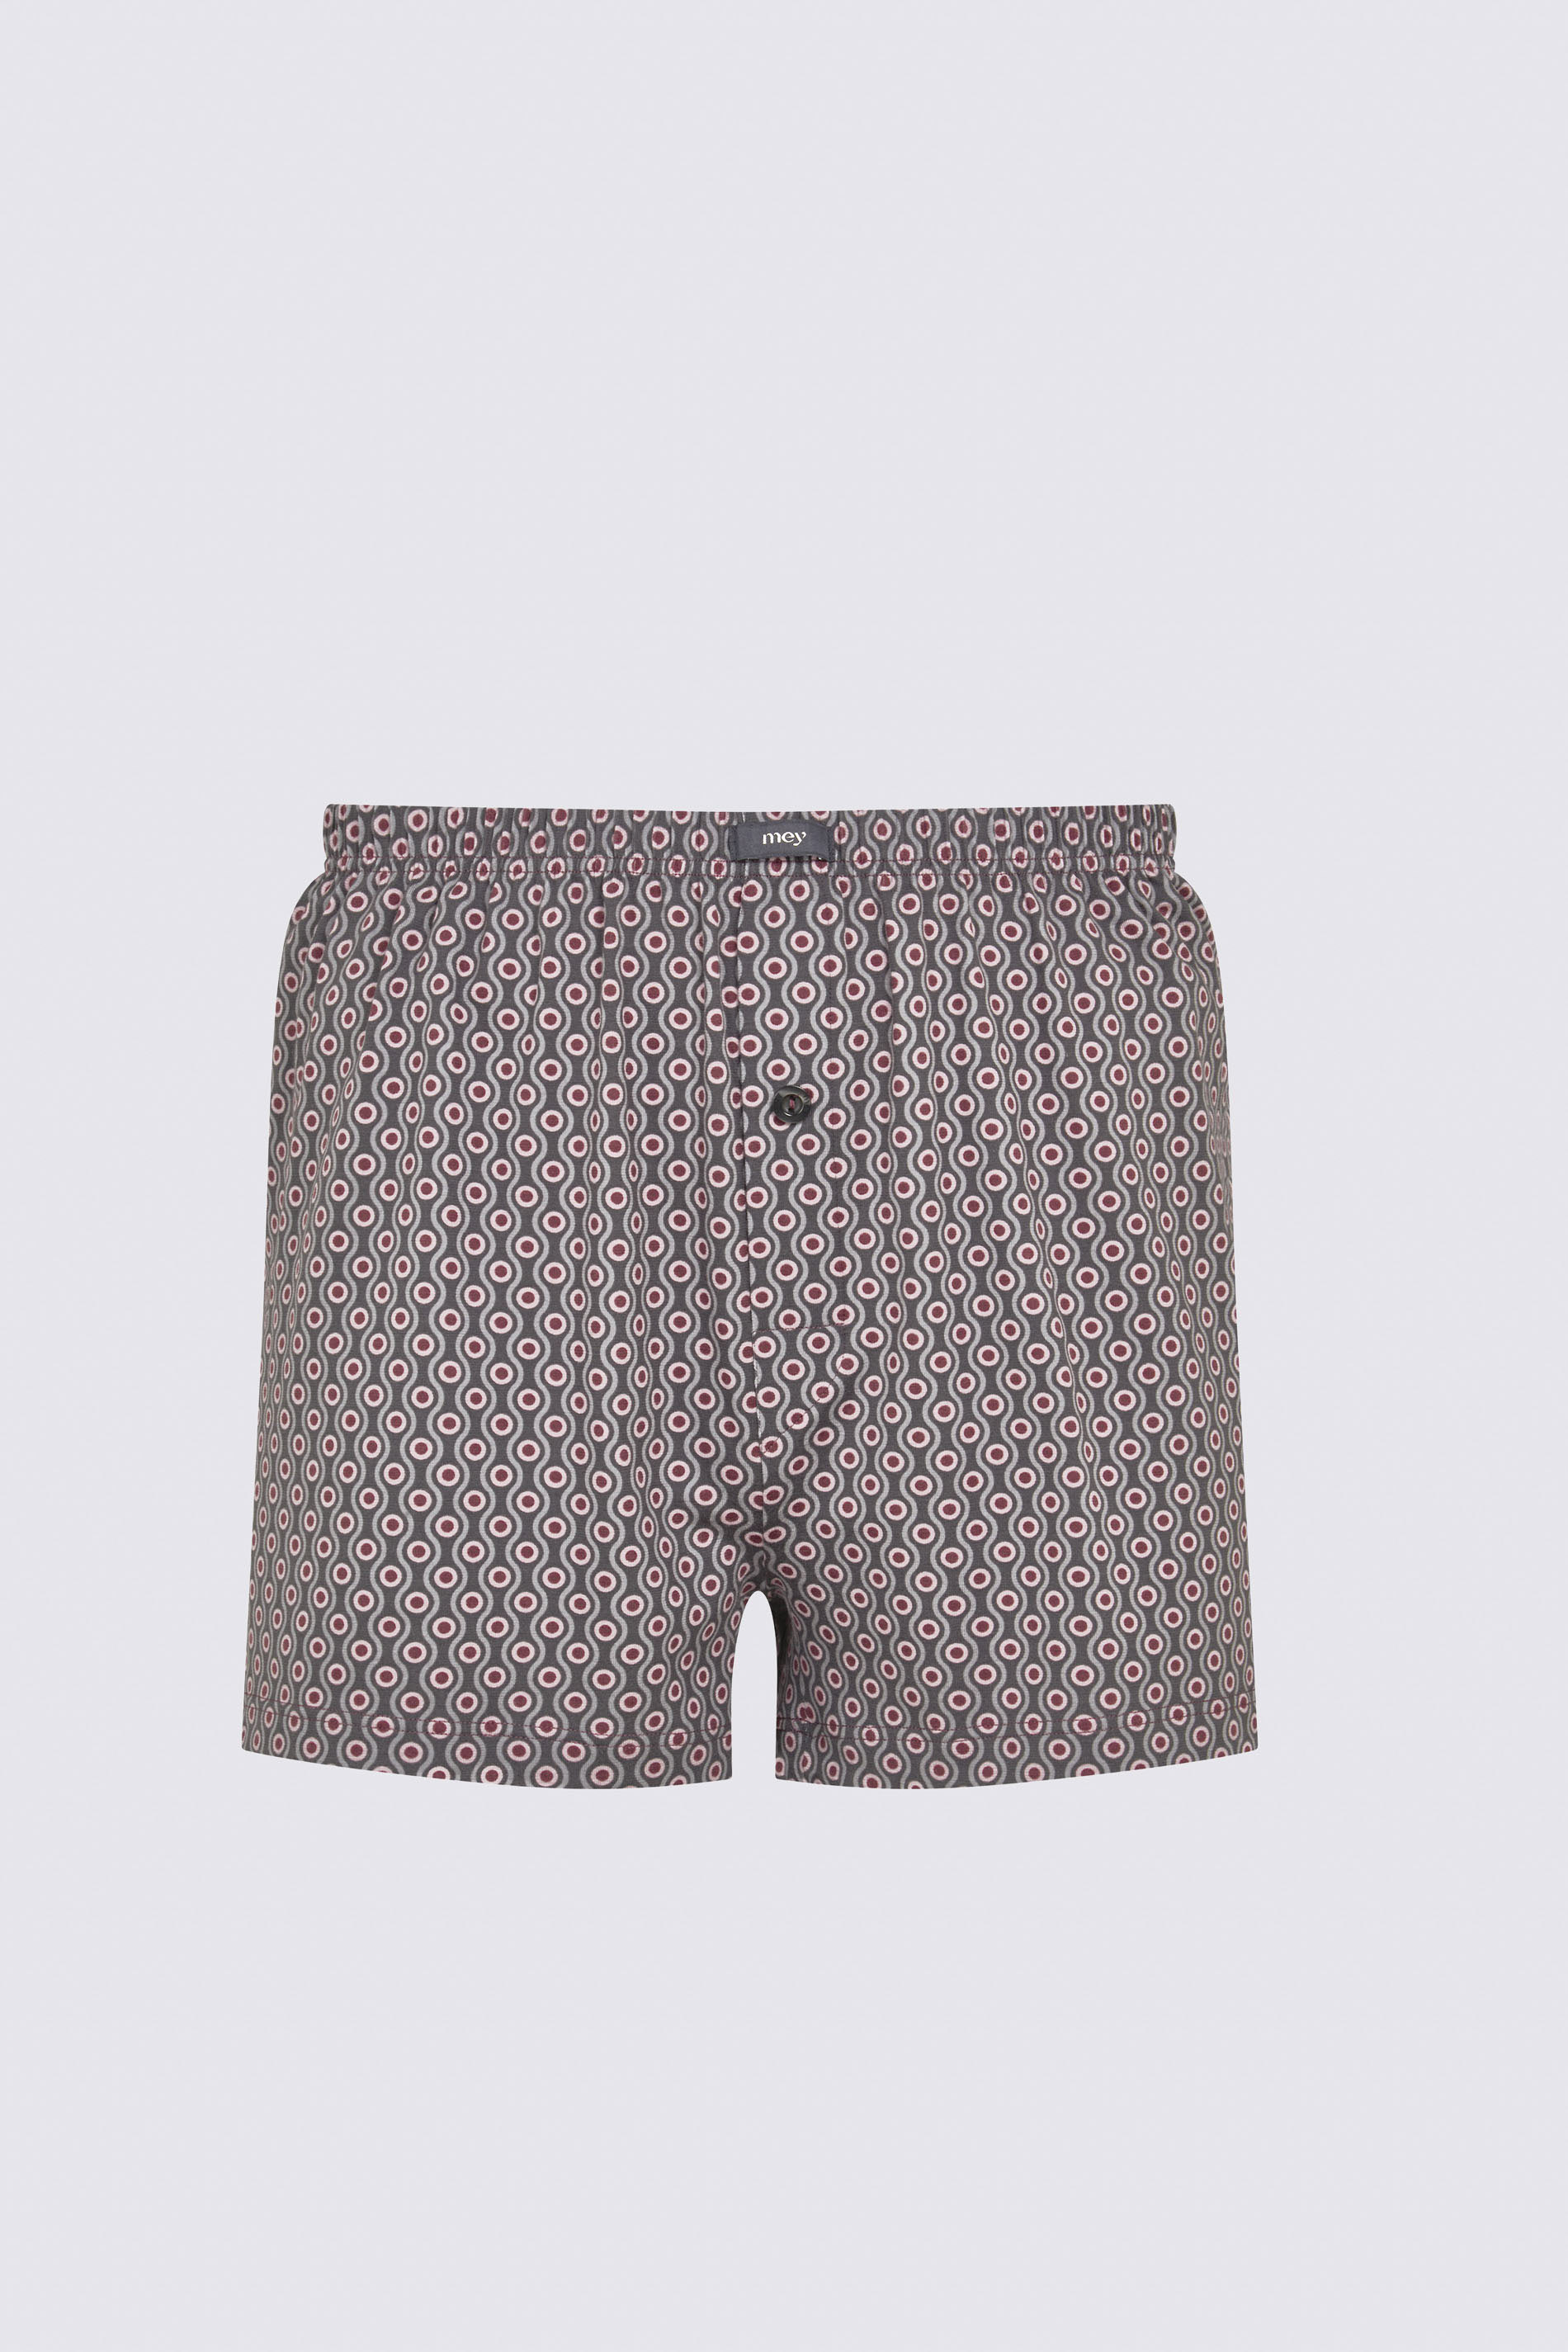 Boxershorts Oxblood Serie 4 Col Dots Uitknippen | mey®